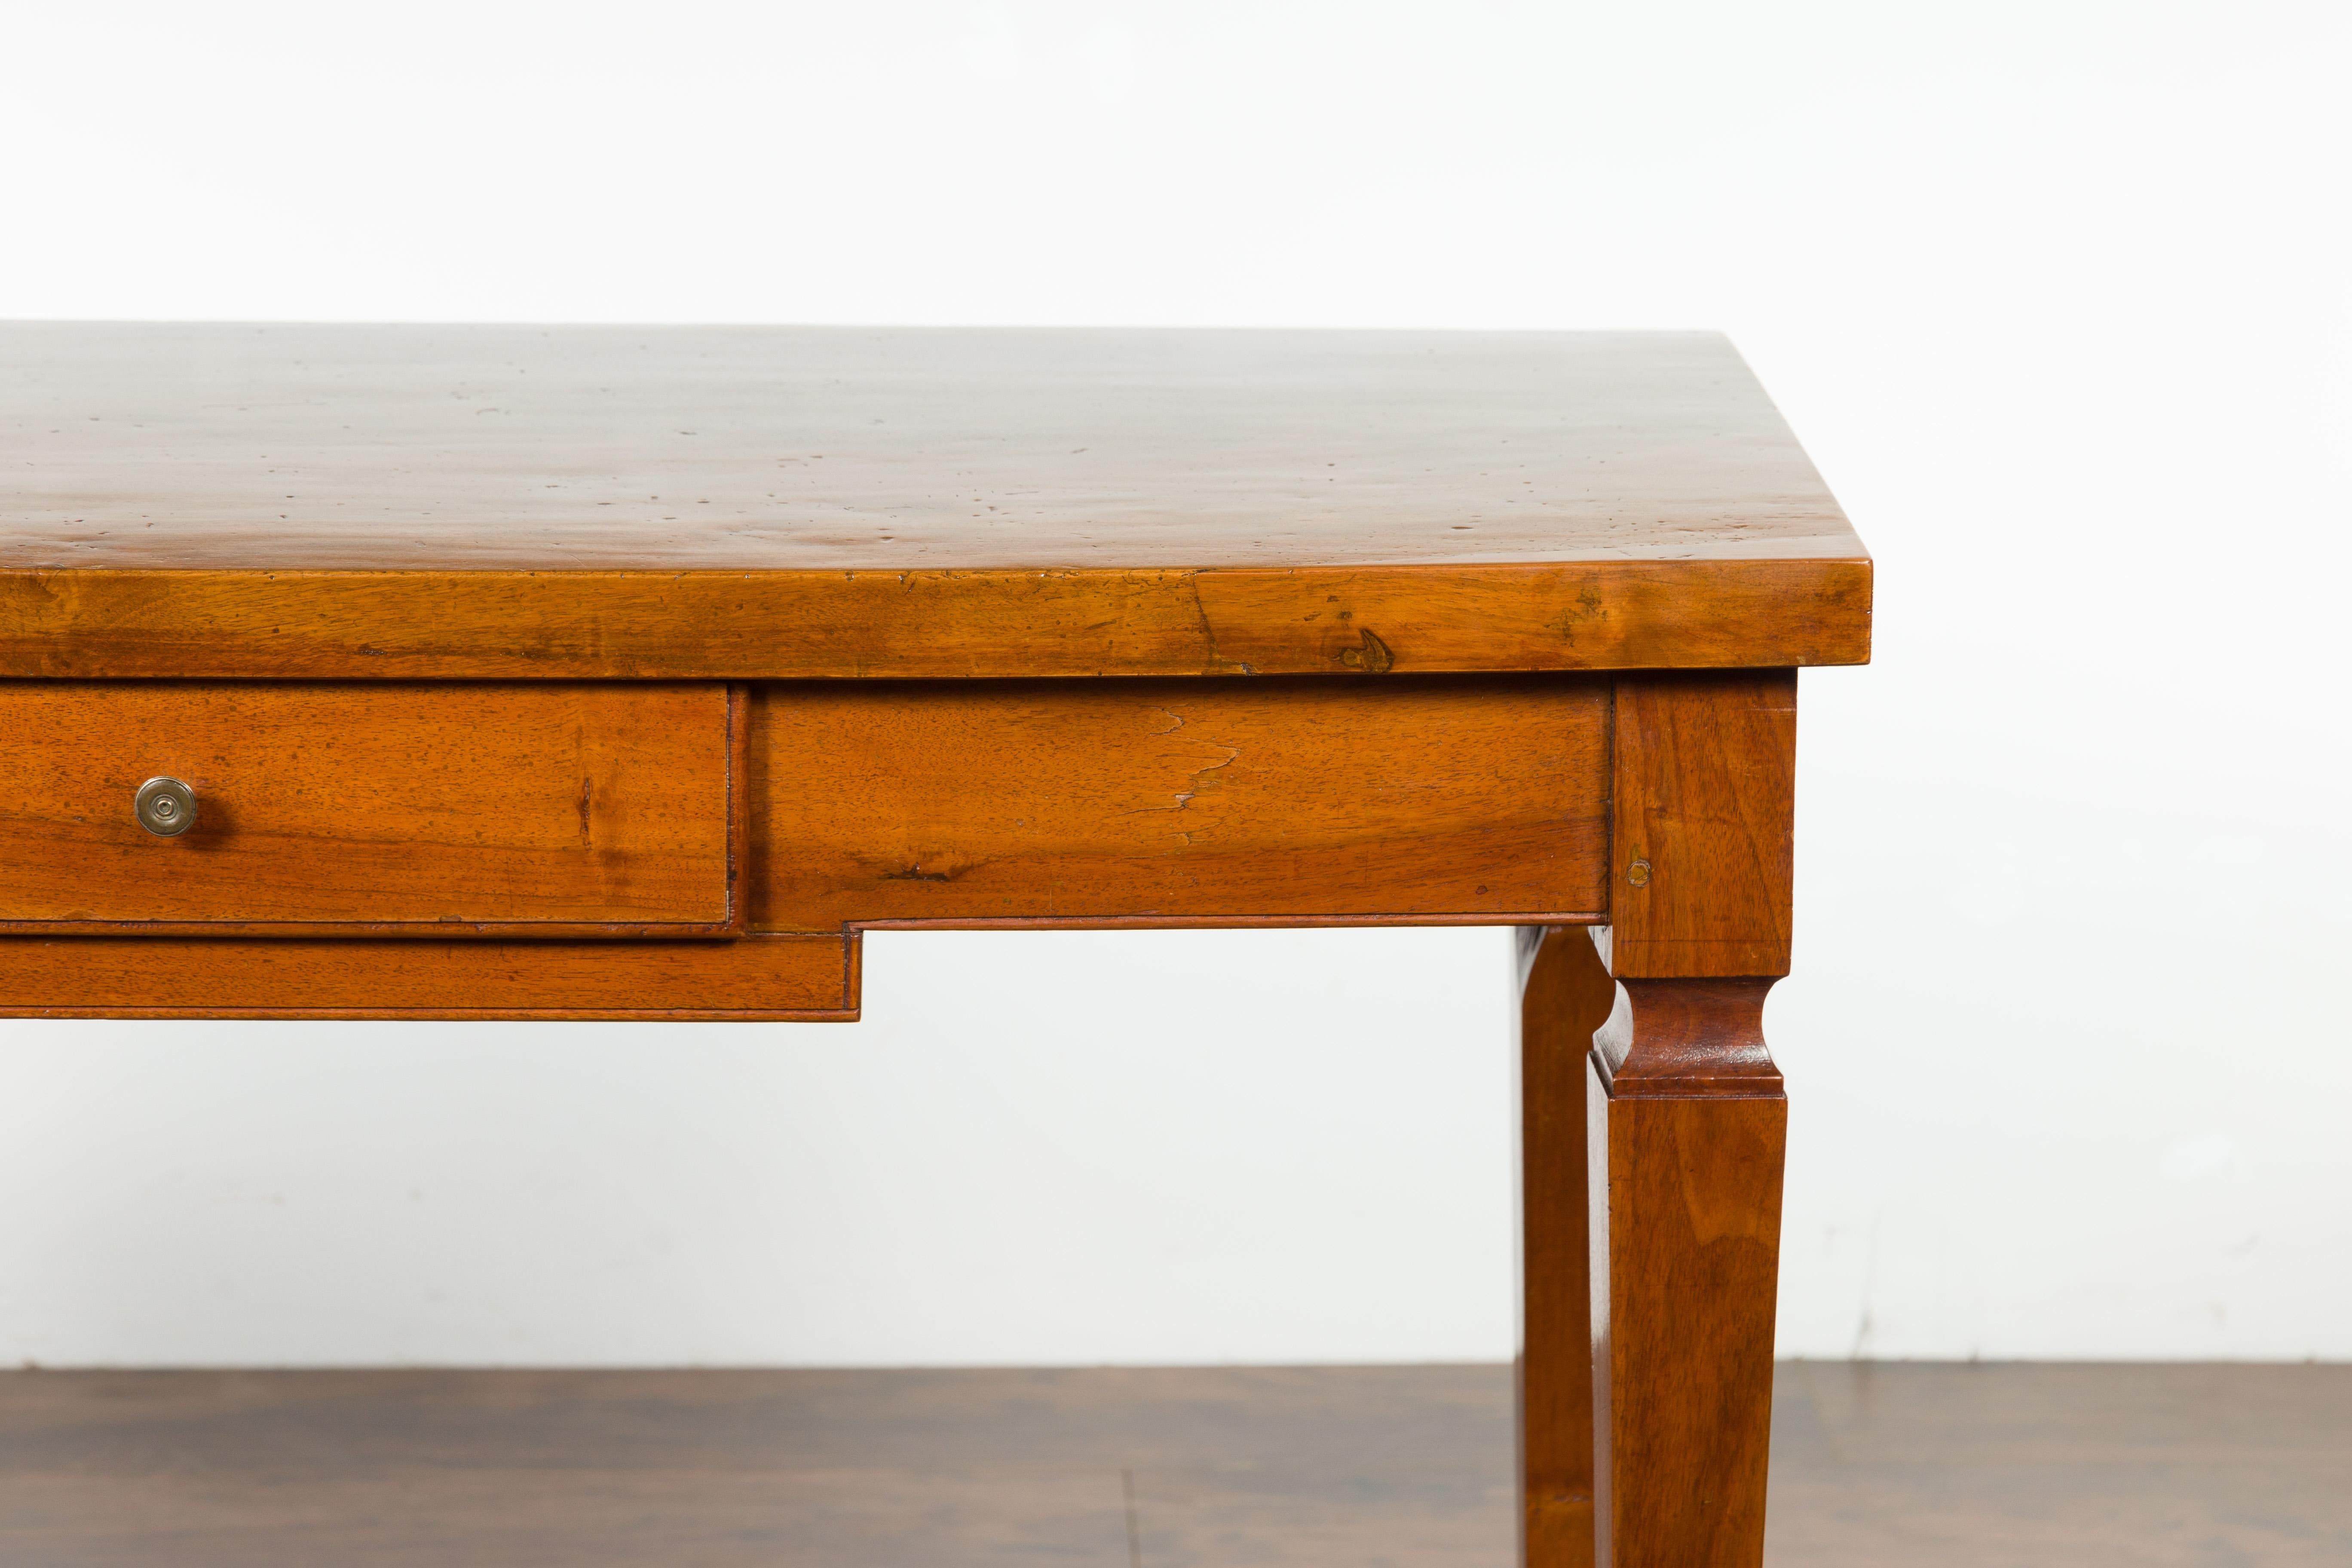 Italian 19th Century Walnut Desk with Single Drawer and Tapered Legs For Sale 2